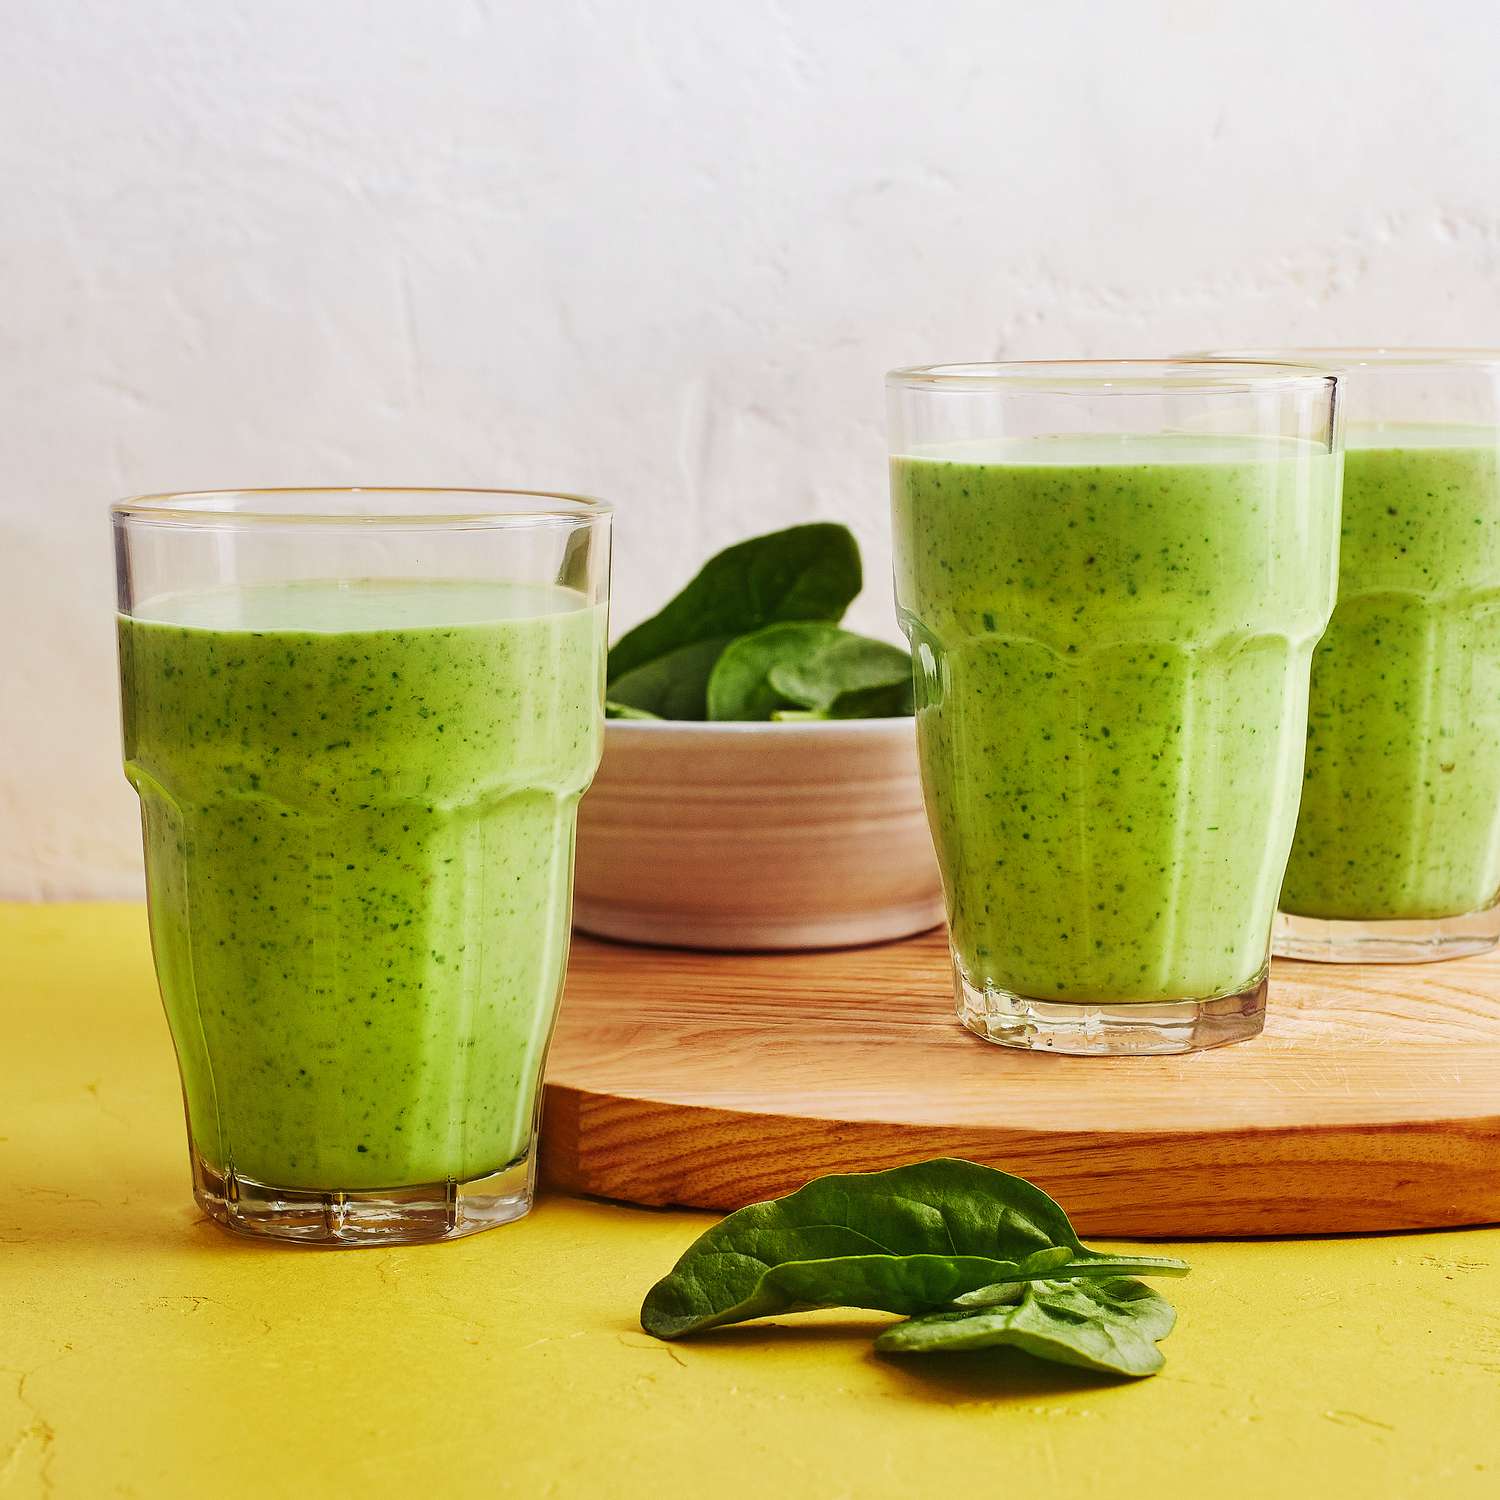 spinach peanut butter banana smoothie